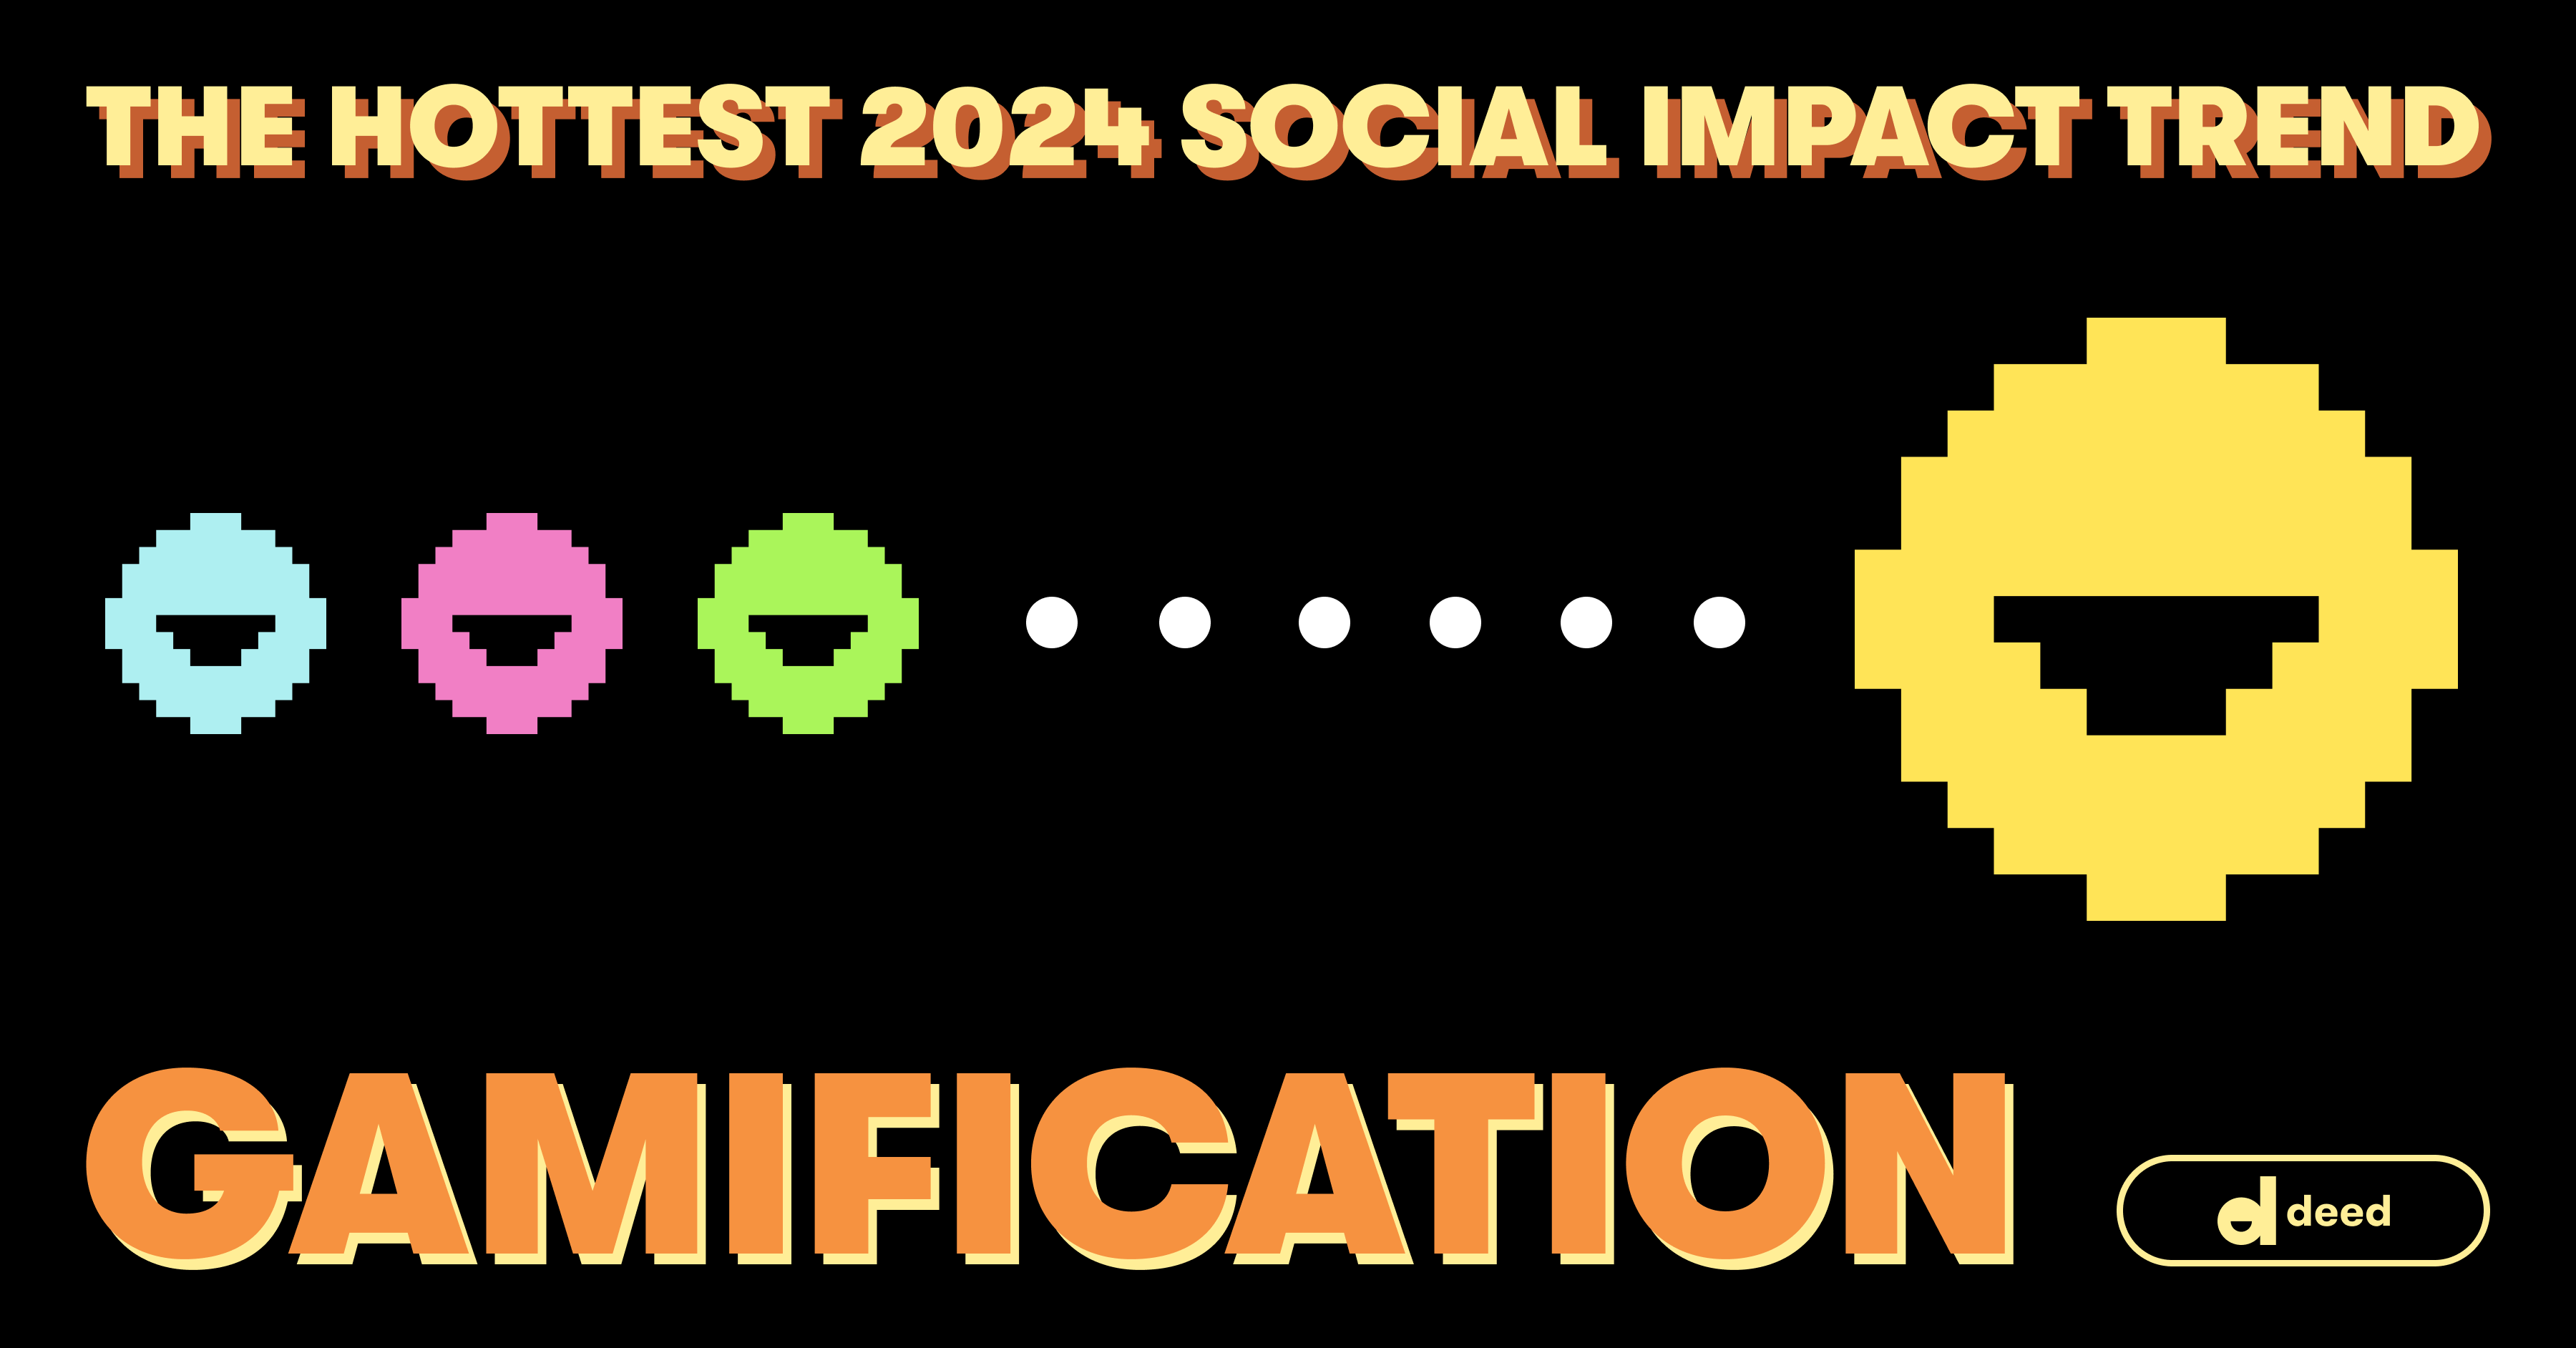 Deed Gamification Hotest Trend 2024